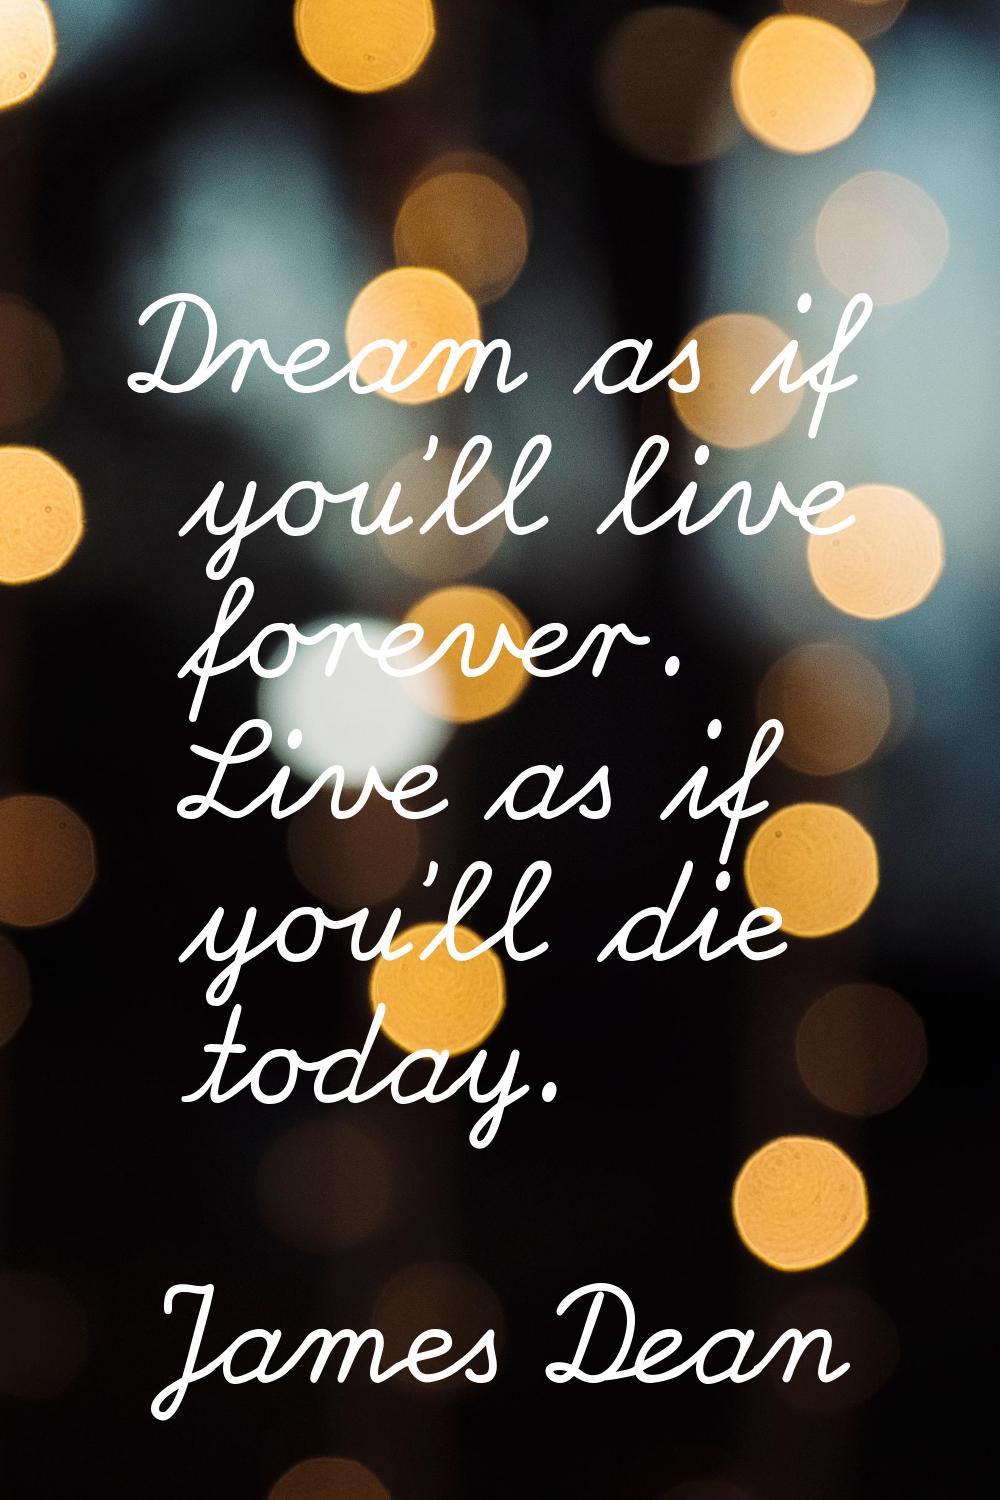 Dream as if you'll live forever. Live as if you'll die today.